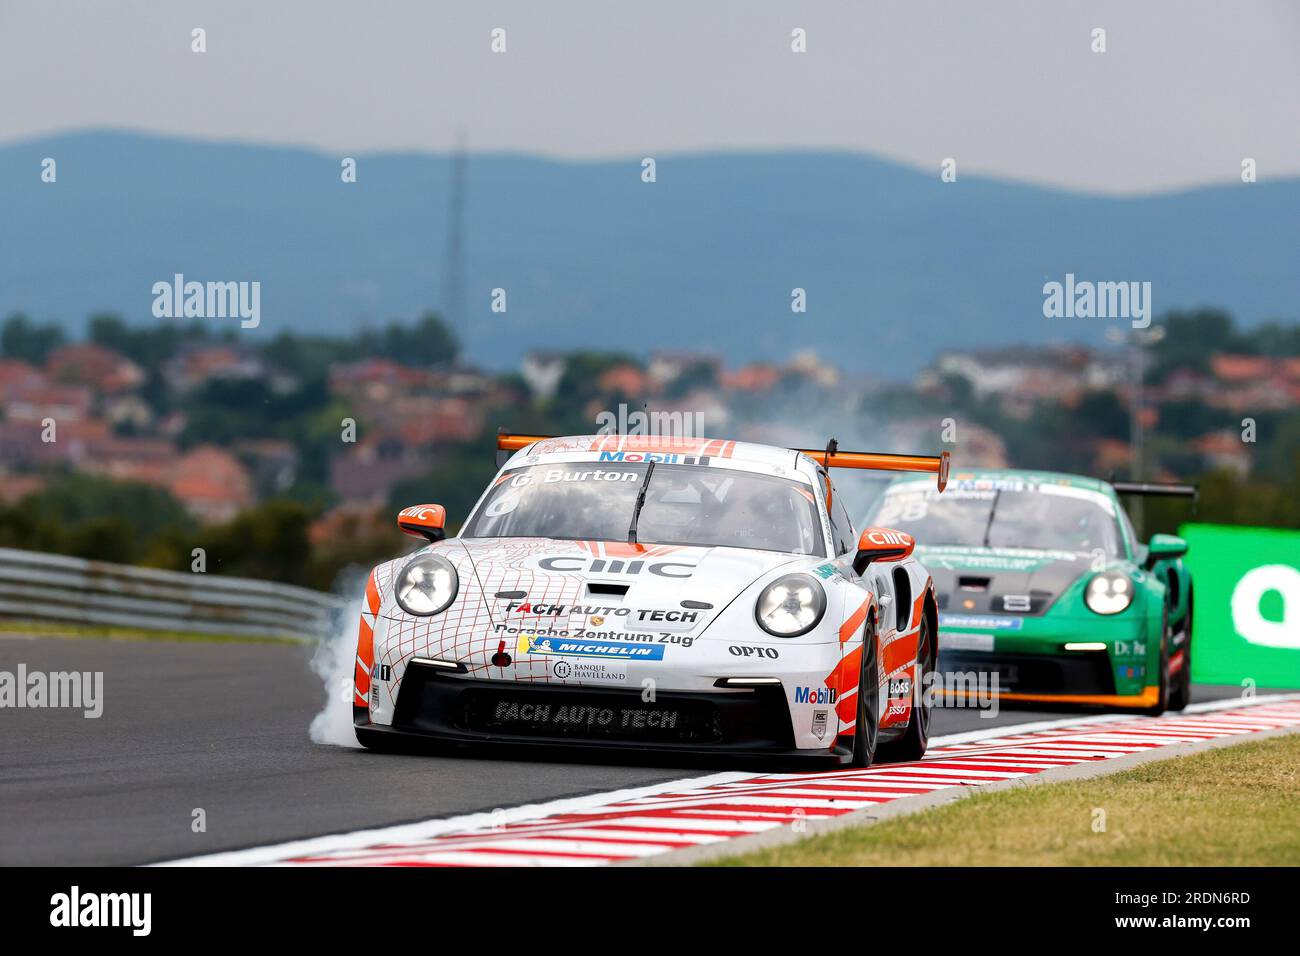 Budapest, Hungary. 21st July, 2023. #6 Gustav Burton (UK, Fach Auto Tech), Porsche Mobil 1 Supercup at Hungaroring on July 21, 2023 in Budapest, Hungary. (Photo by HIGH TWO) Credit: dpa/Alamy Live News Stock Photo